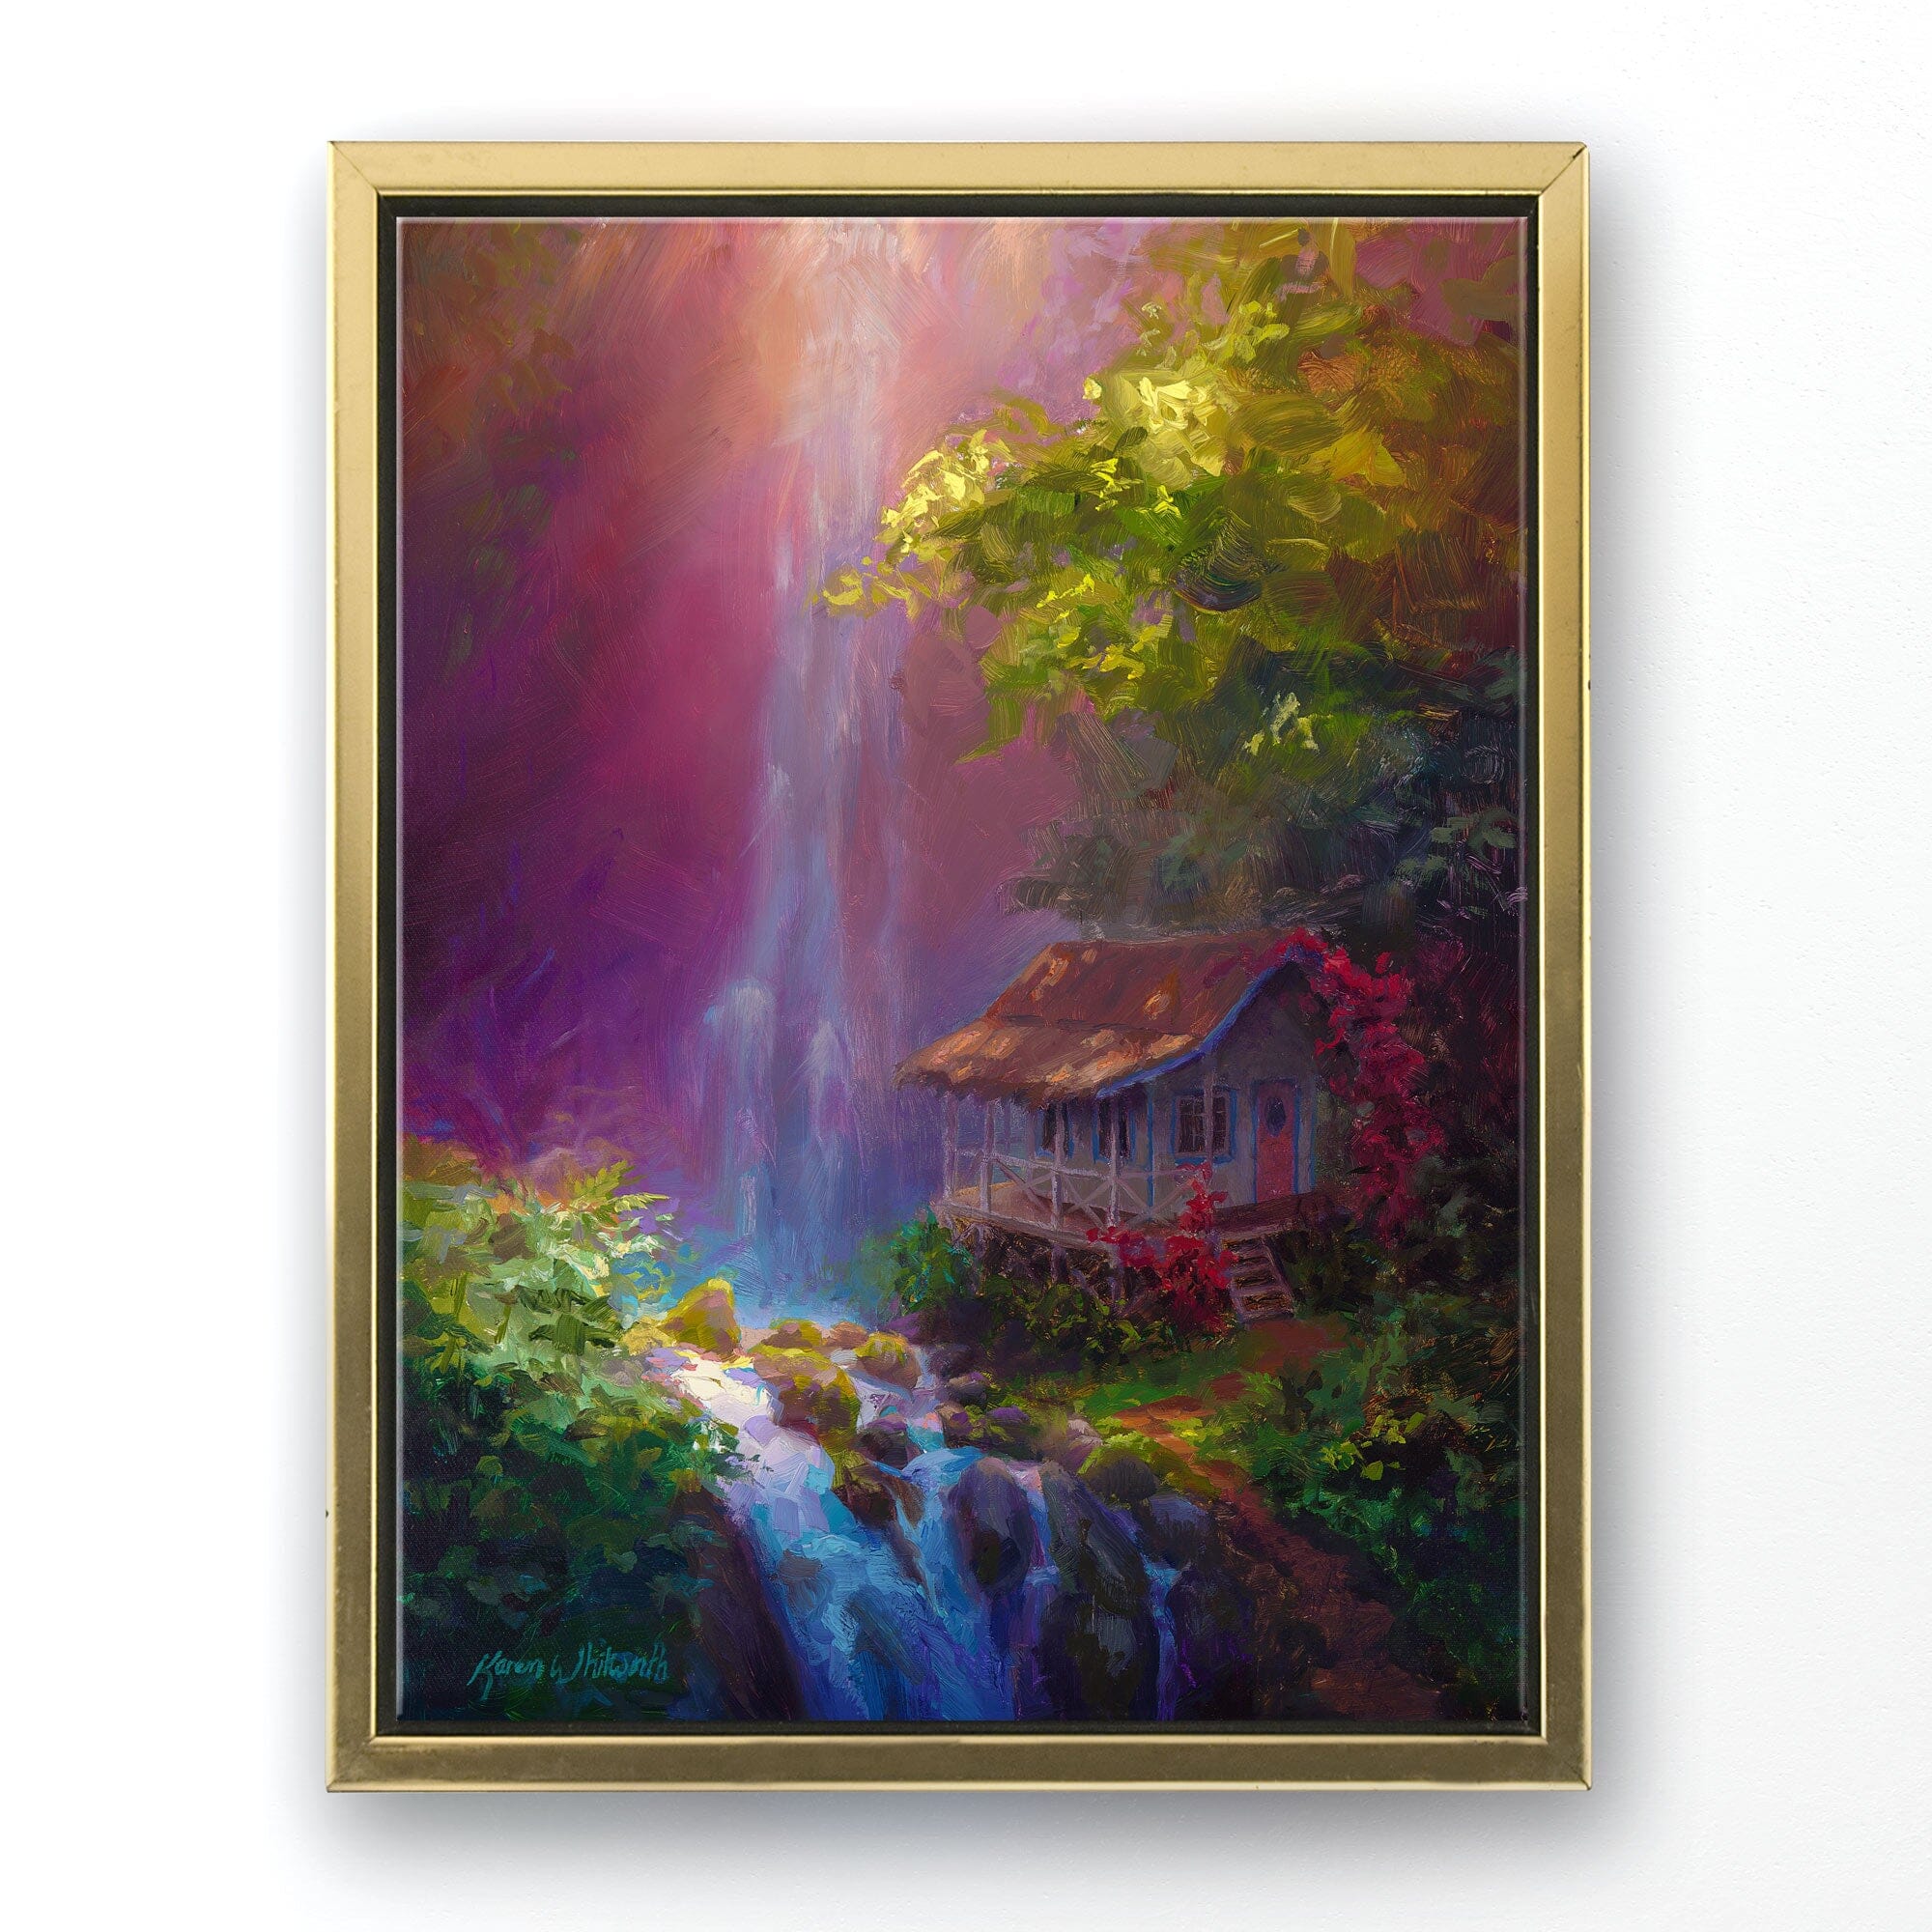 Tropical Waterfall Painting on Canvas - Large Waterfall Wall Art